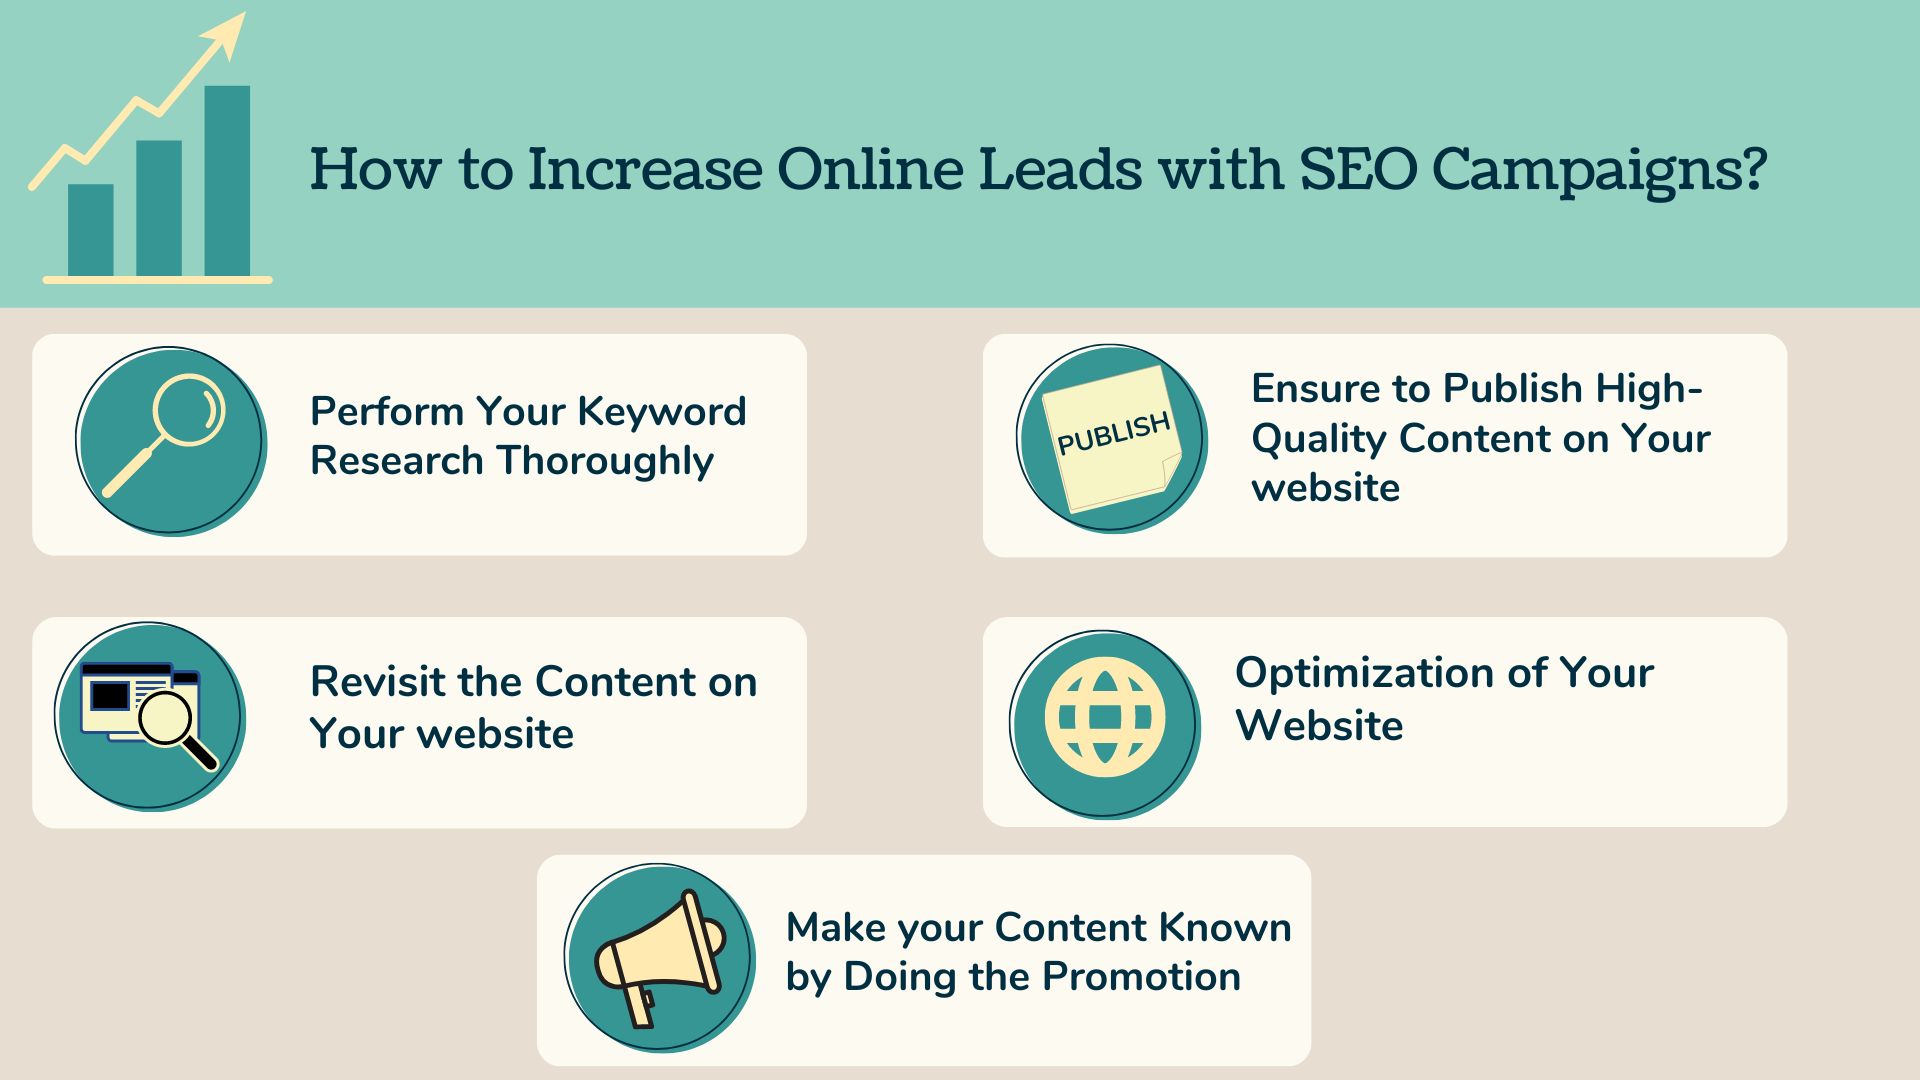 How to Increase Online Leads with SEO Campaigns?